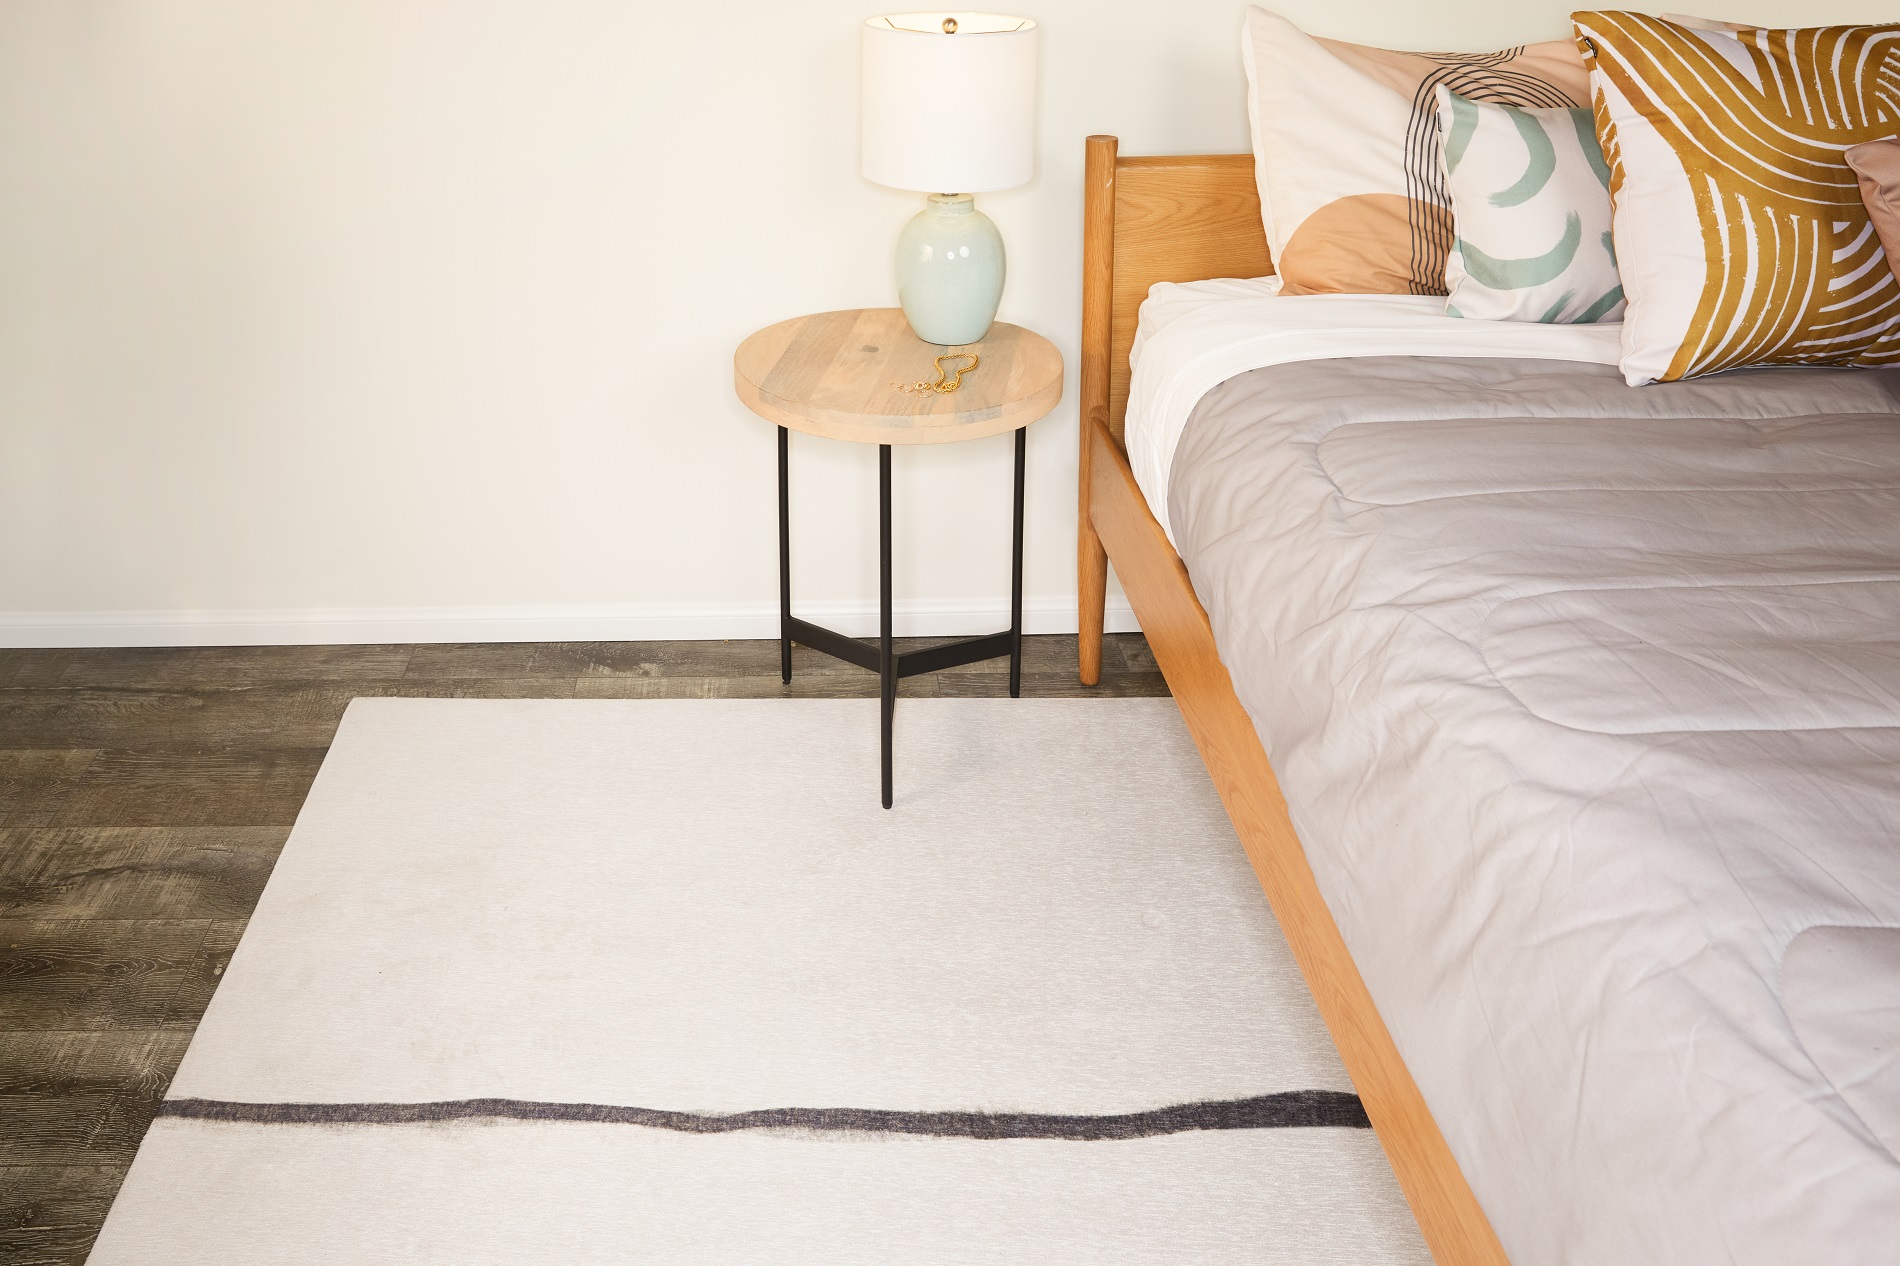 Good Things to Know About Placing a Rug Under Bed Frames – Wilson